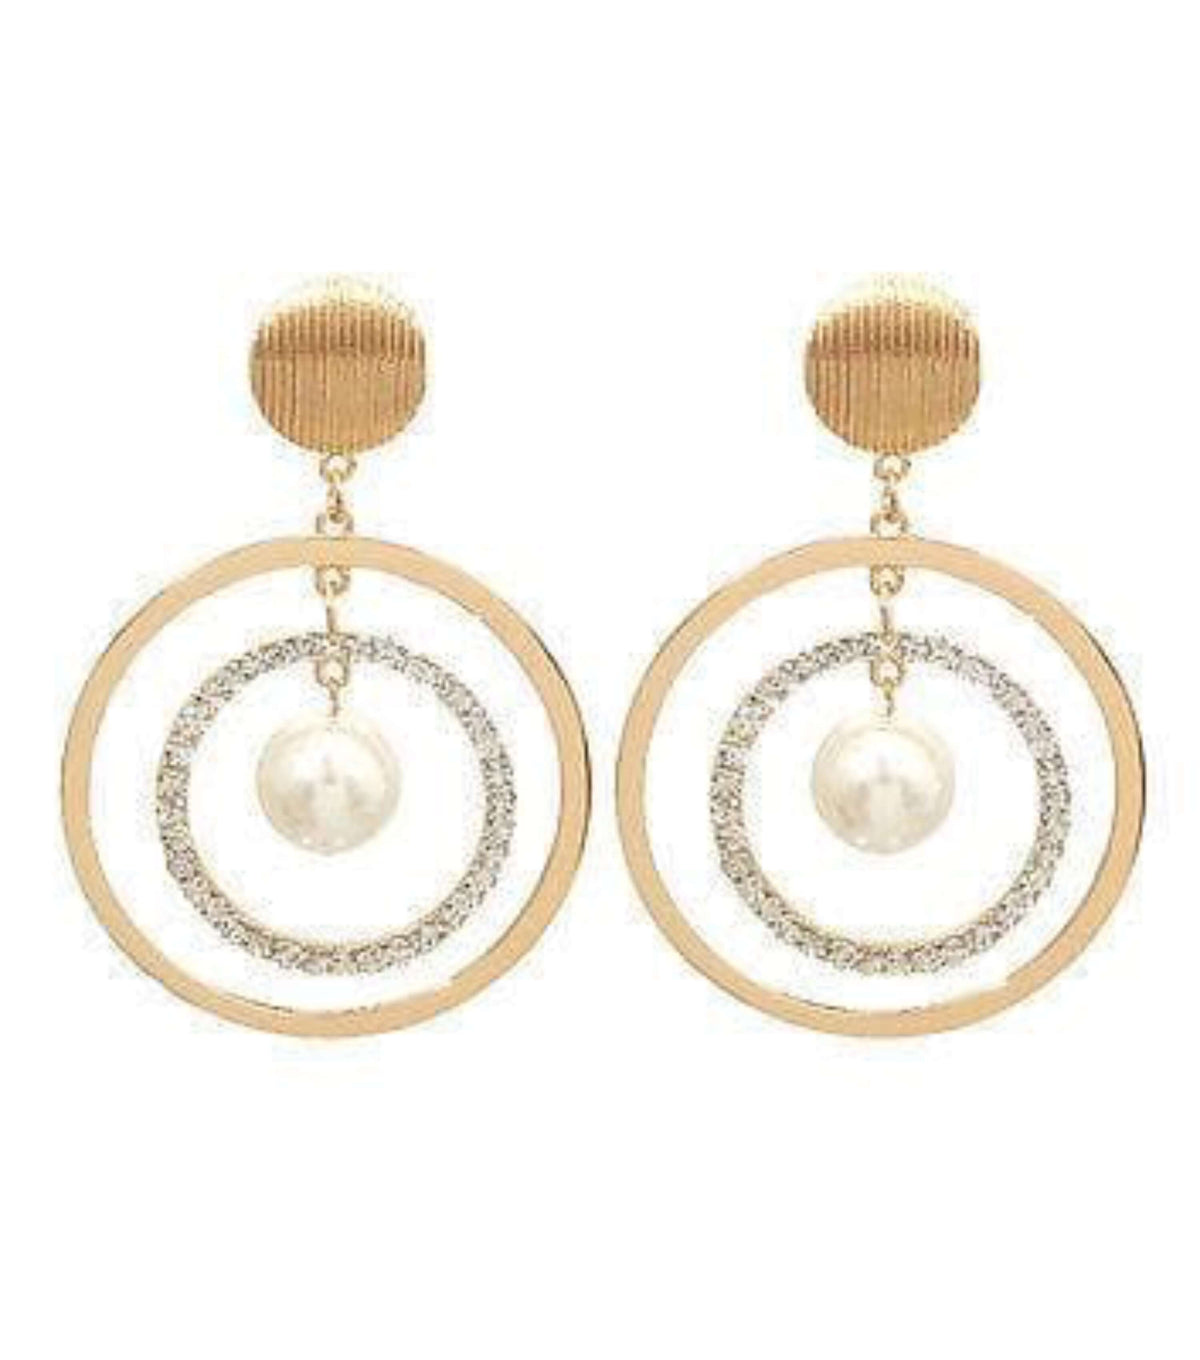 Stone and Pearl Gold Earrings - The House of Awareness